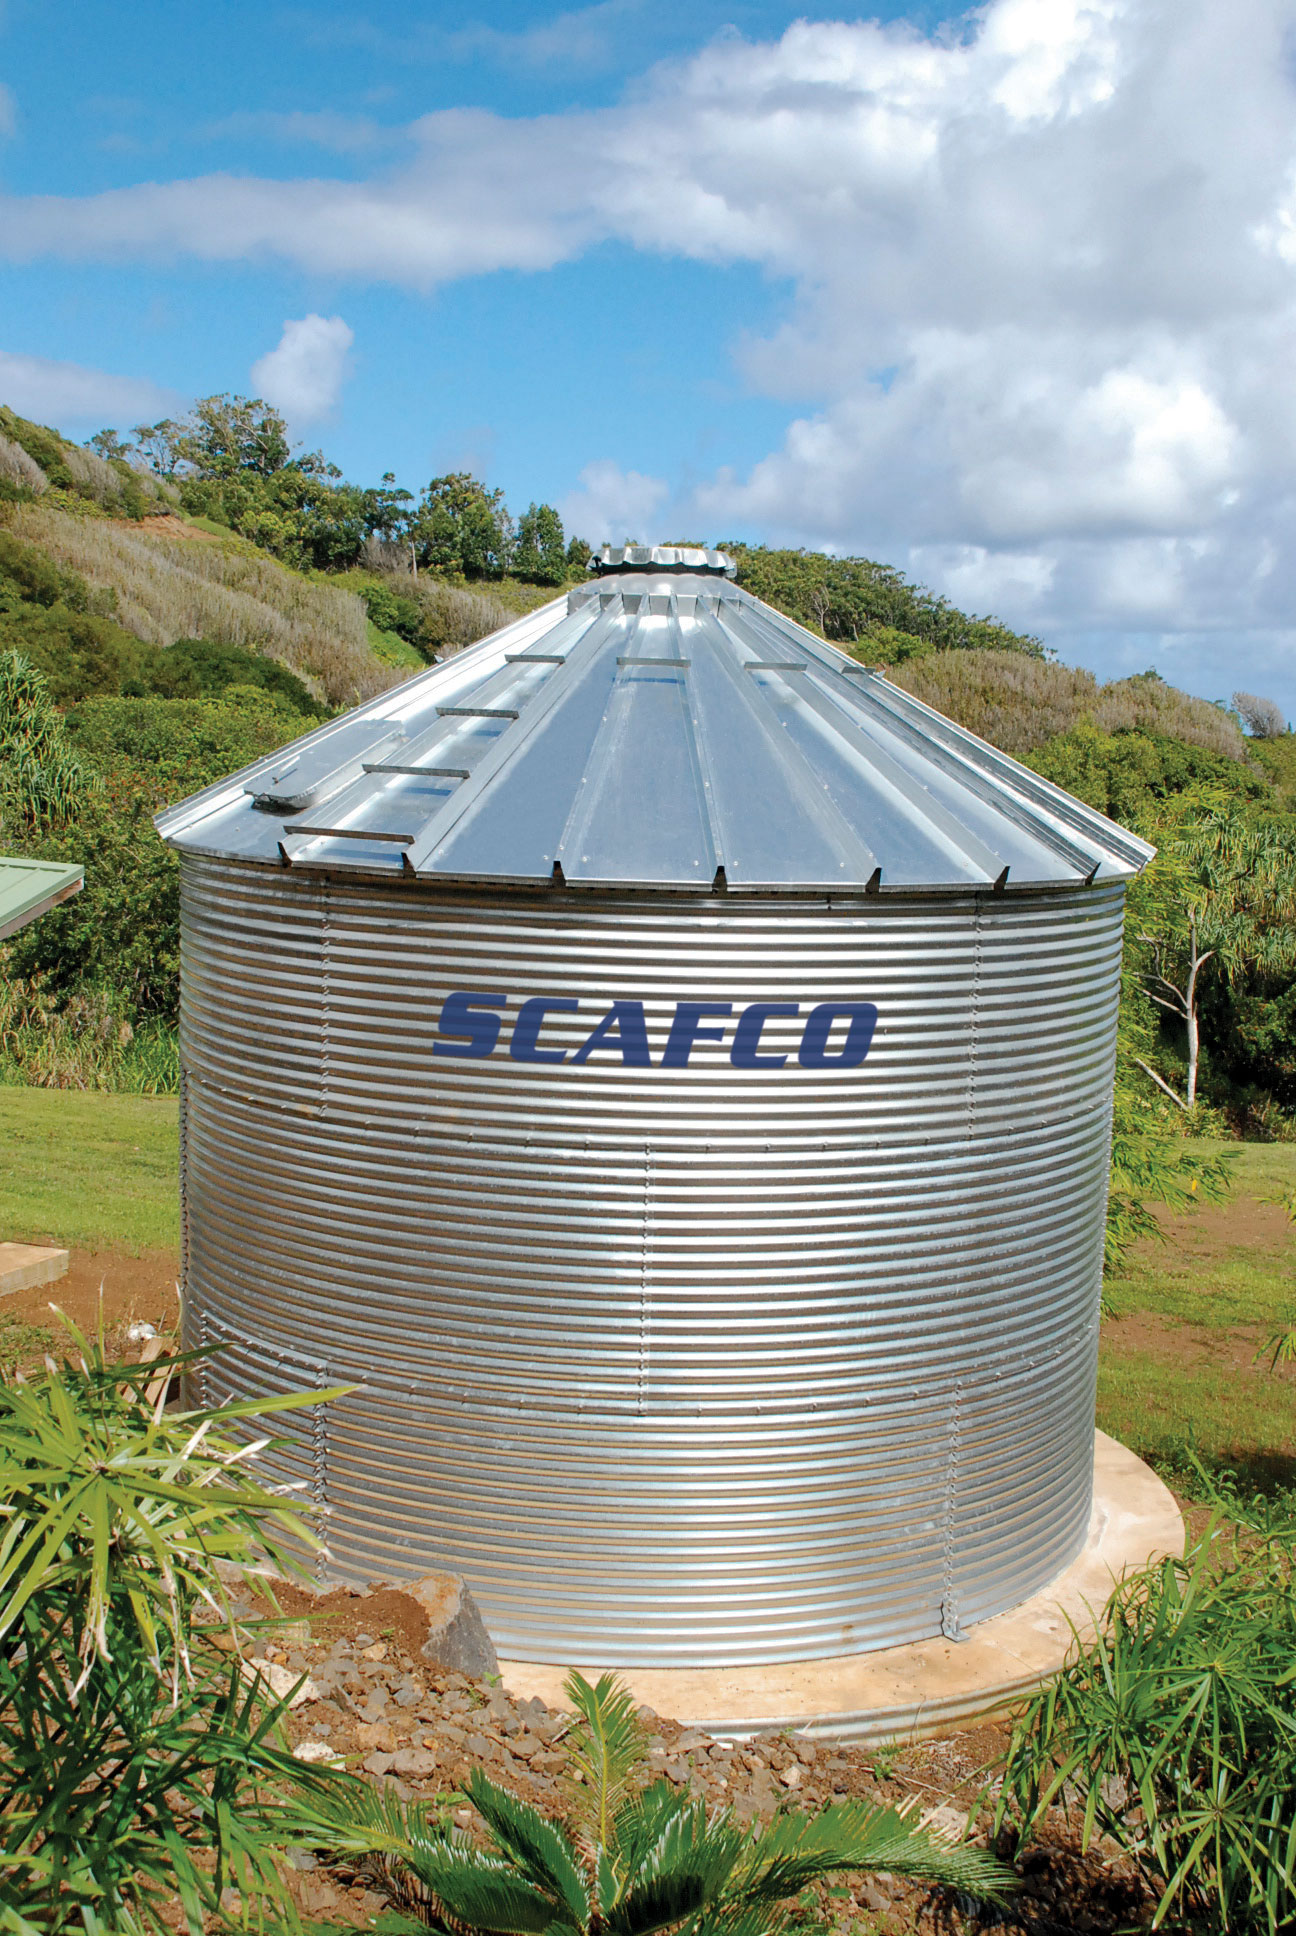 Corrugated Reservoirs And Liners From Flexi Tank Systems